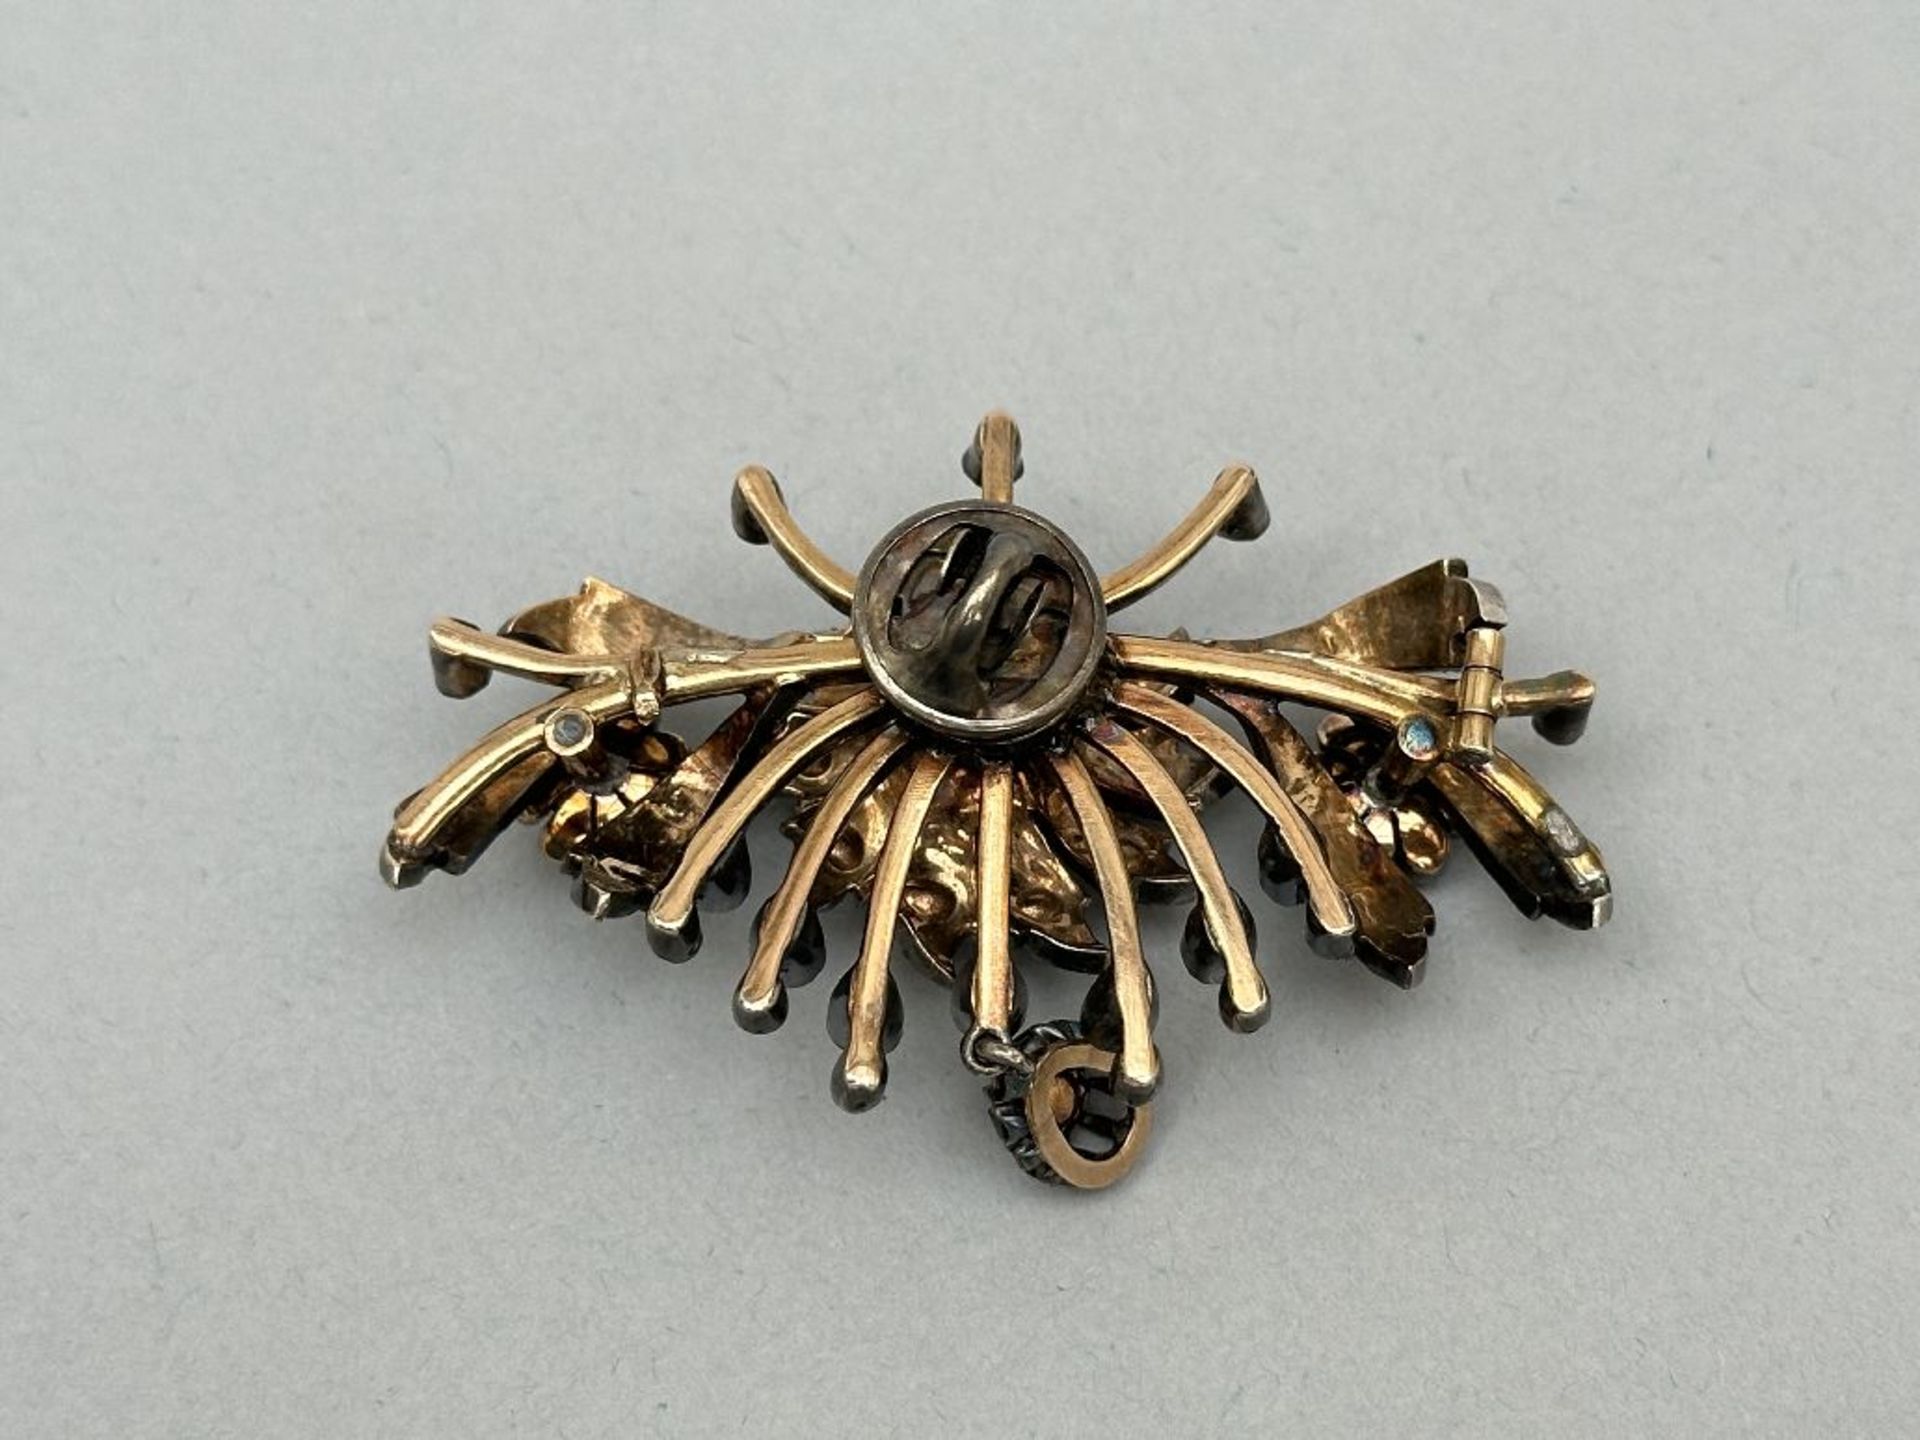 Flemish jewelry: flower brooch and pendant - Image 3 of 5